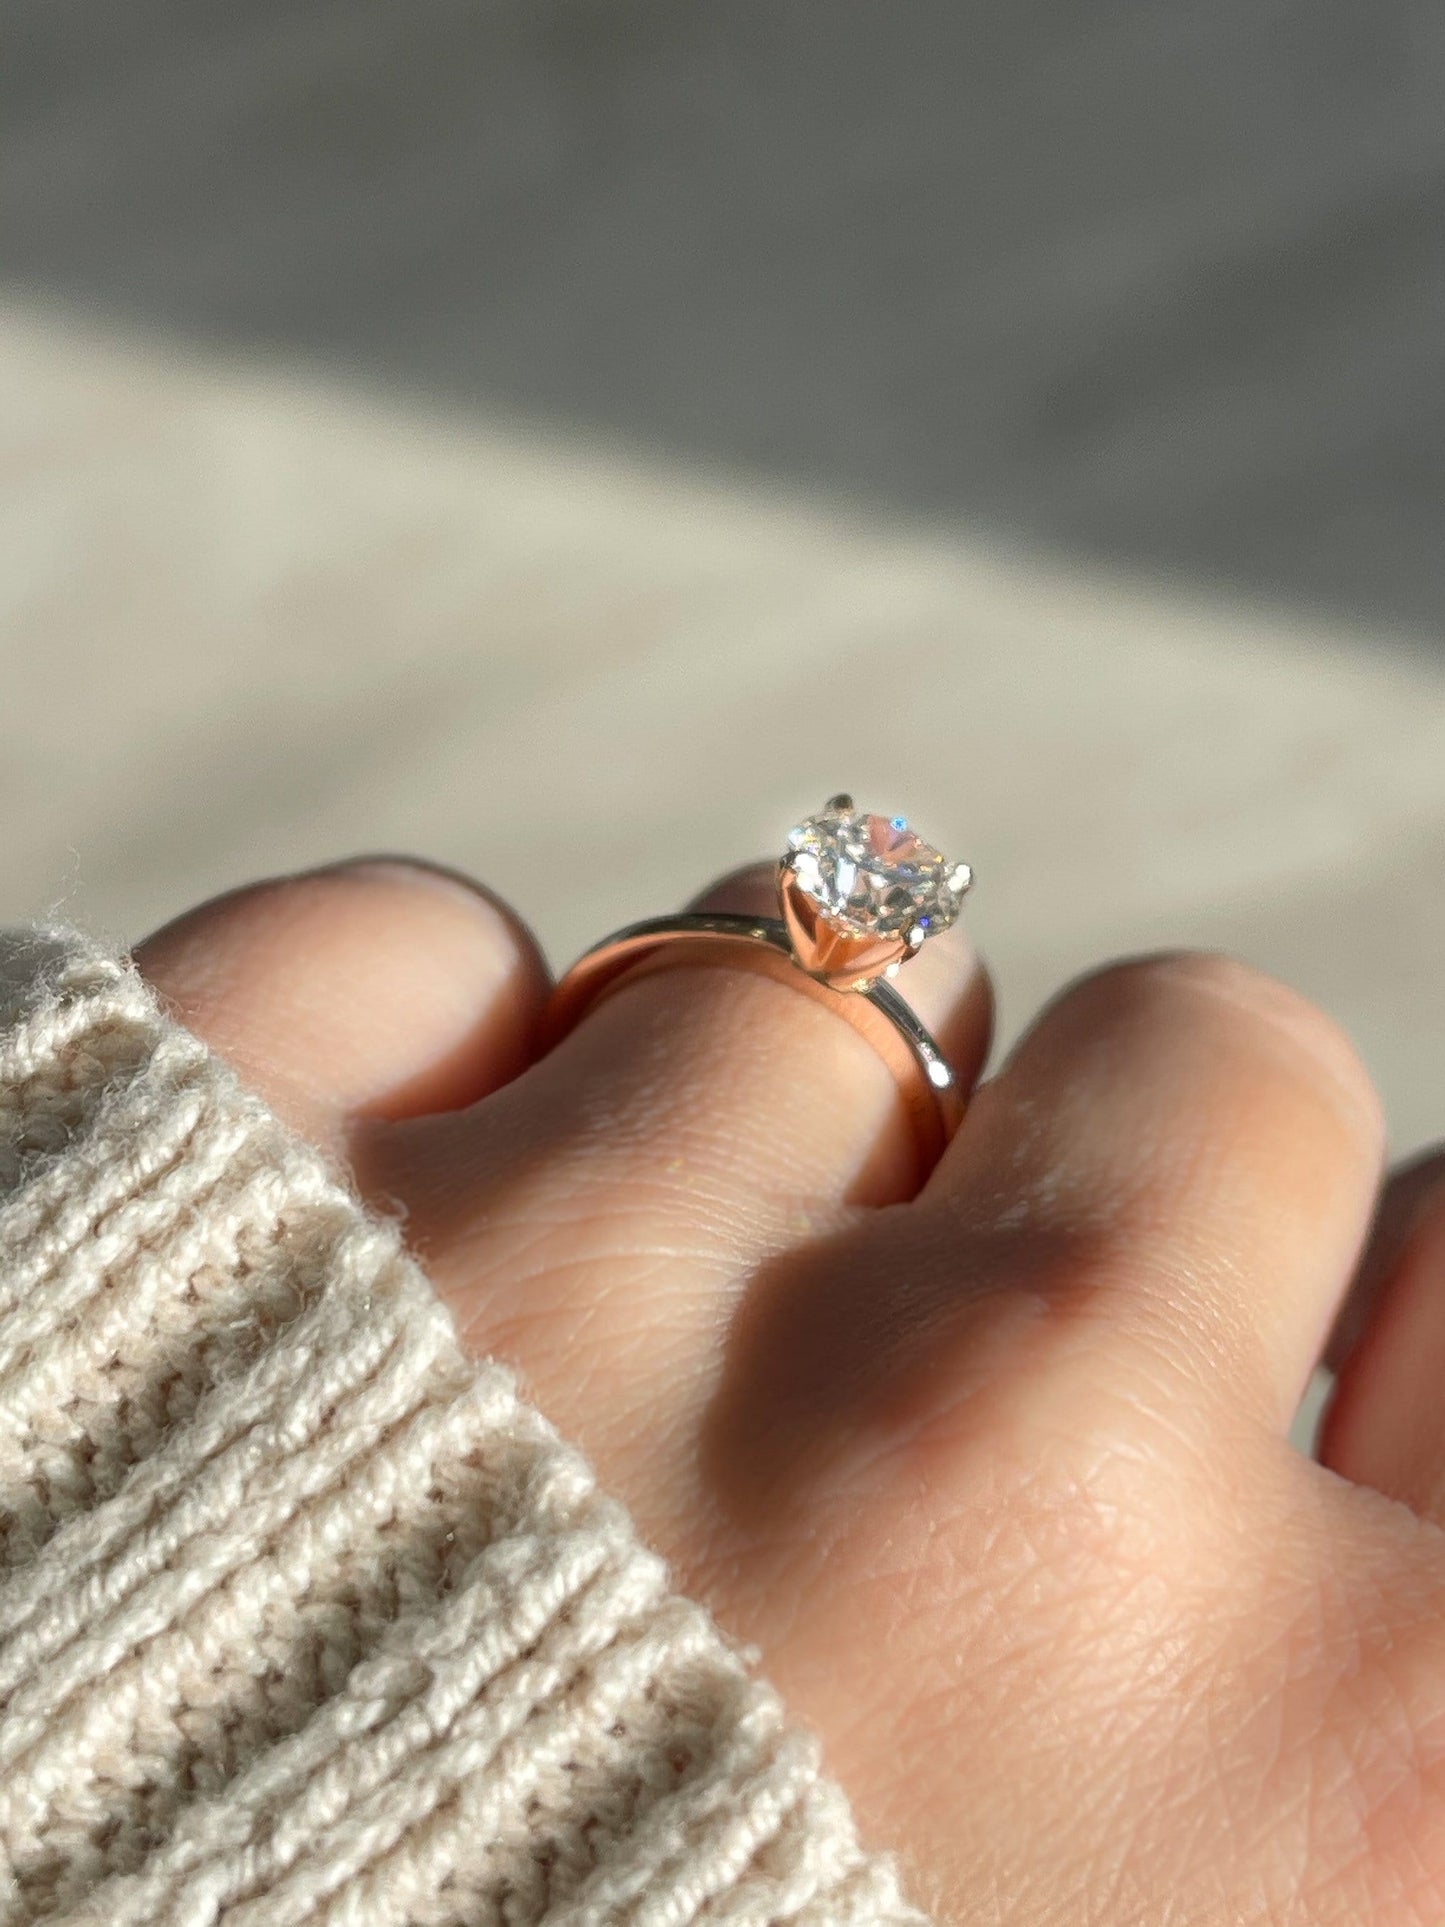 Engagement vs Wedding Rings: How Do They Differ? | Walker & Hall